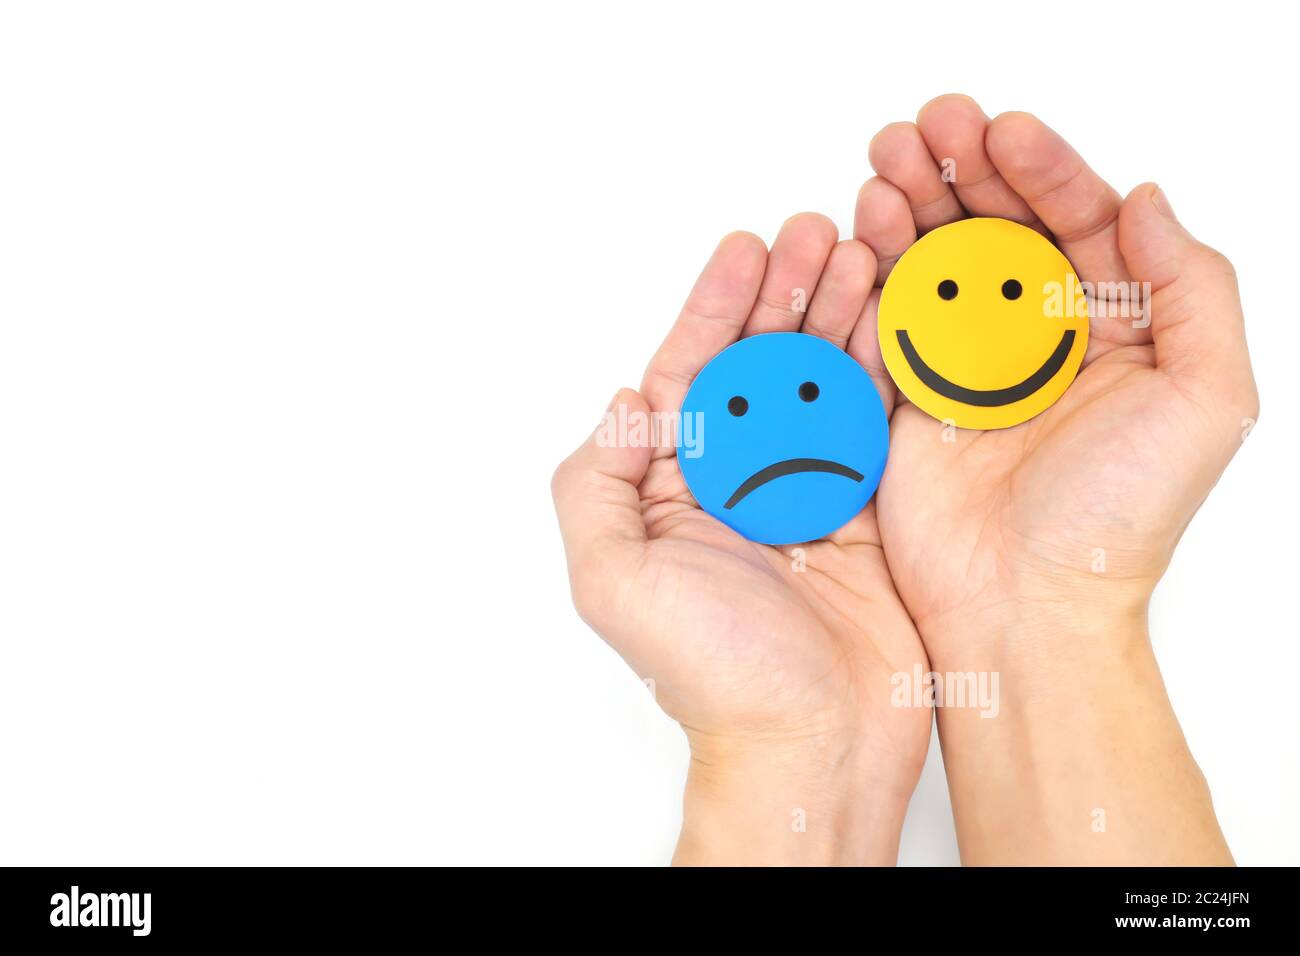 Friendship, sympathy and share happiness concept. Hands holding sad and happy faces hugging each other. Stock Photo